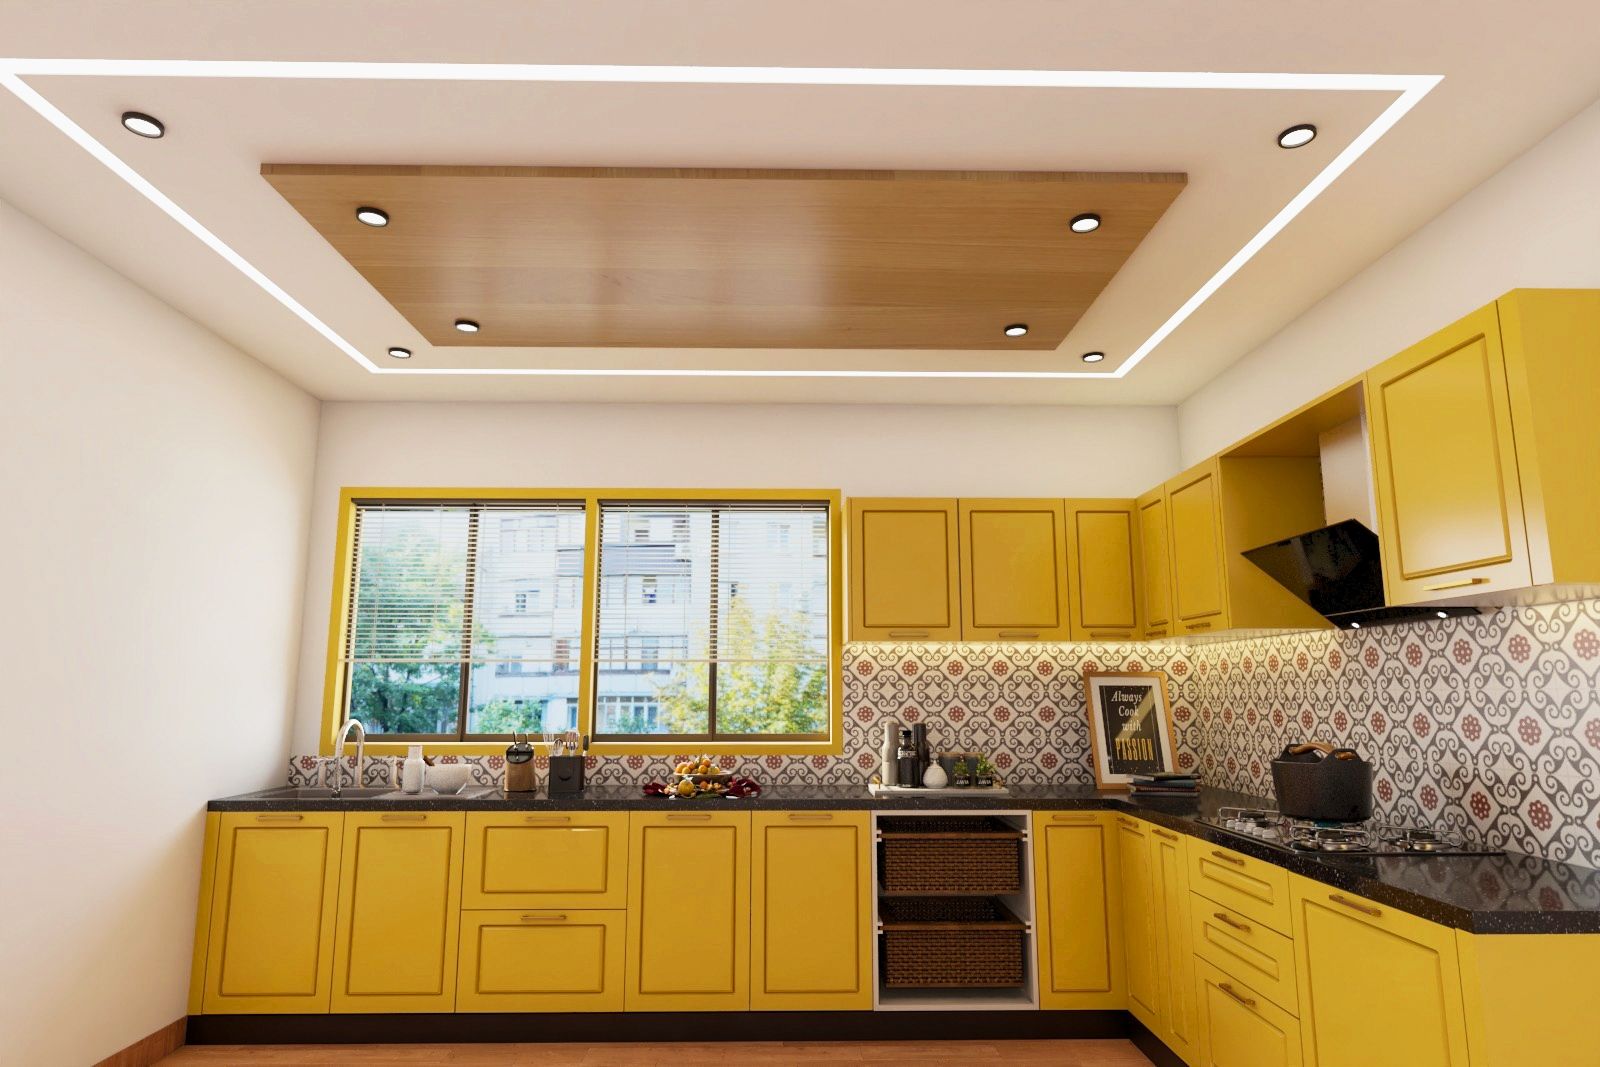 Multi-Layered Wooden And Gypsum False Ceiling Design For The Kitchen